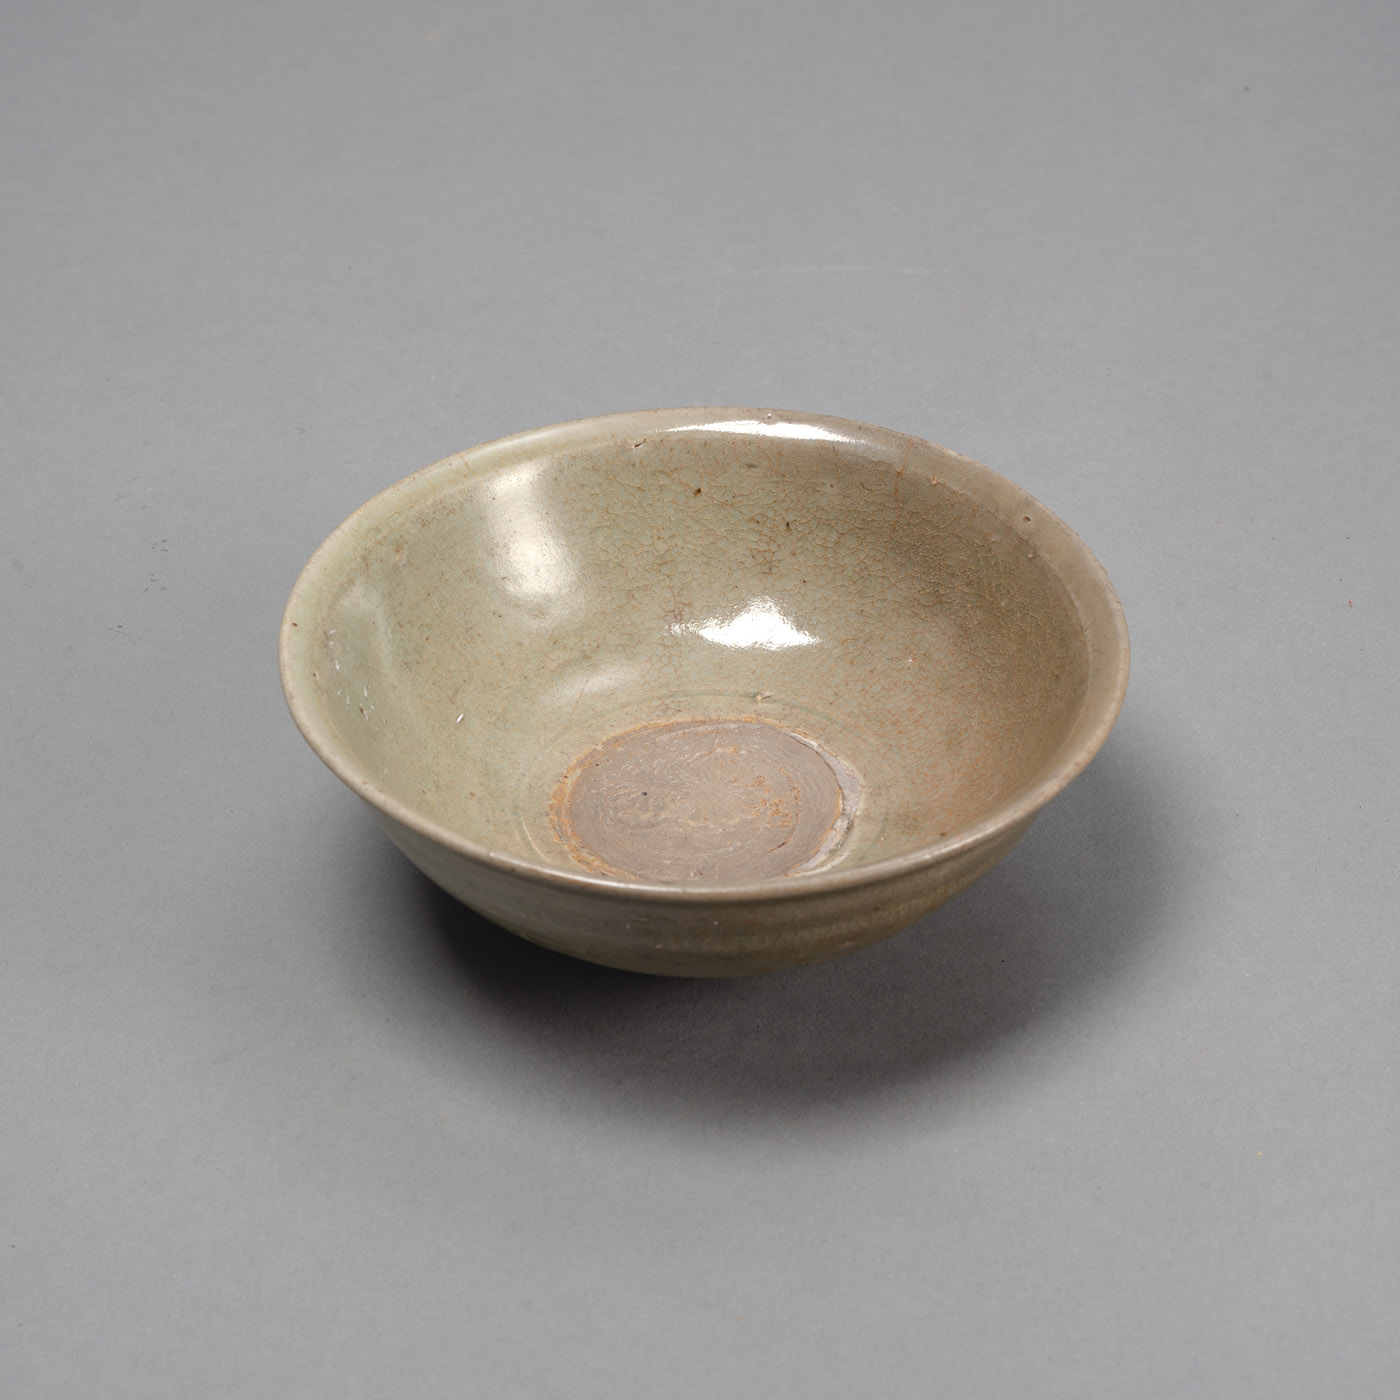 <b>A SELADON BOWL WITH FLORAL RELIEF INSIDE</b>